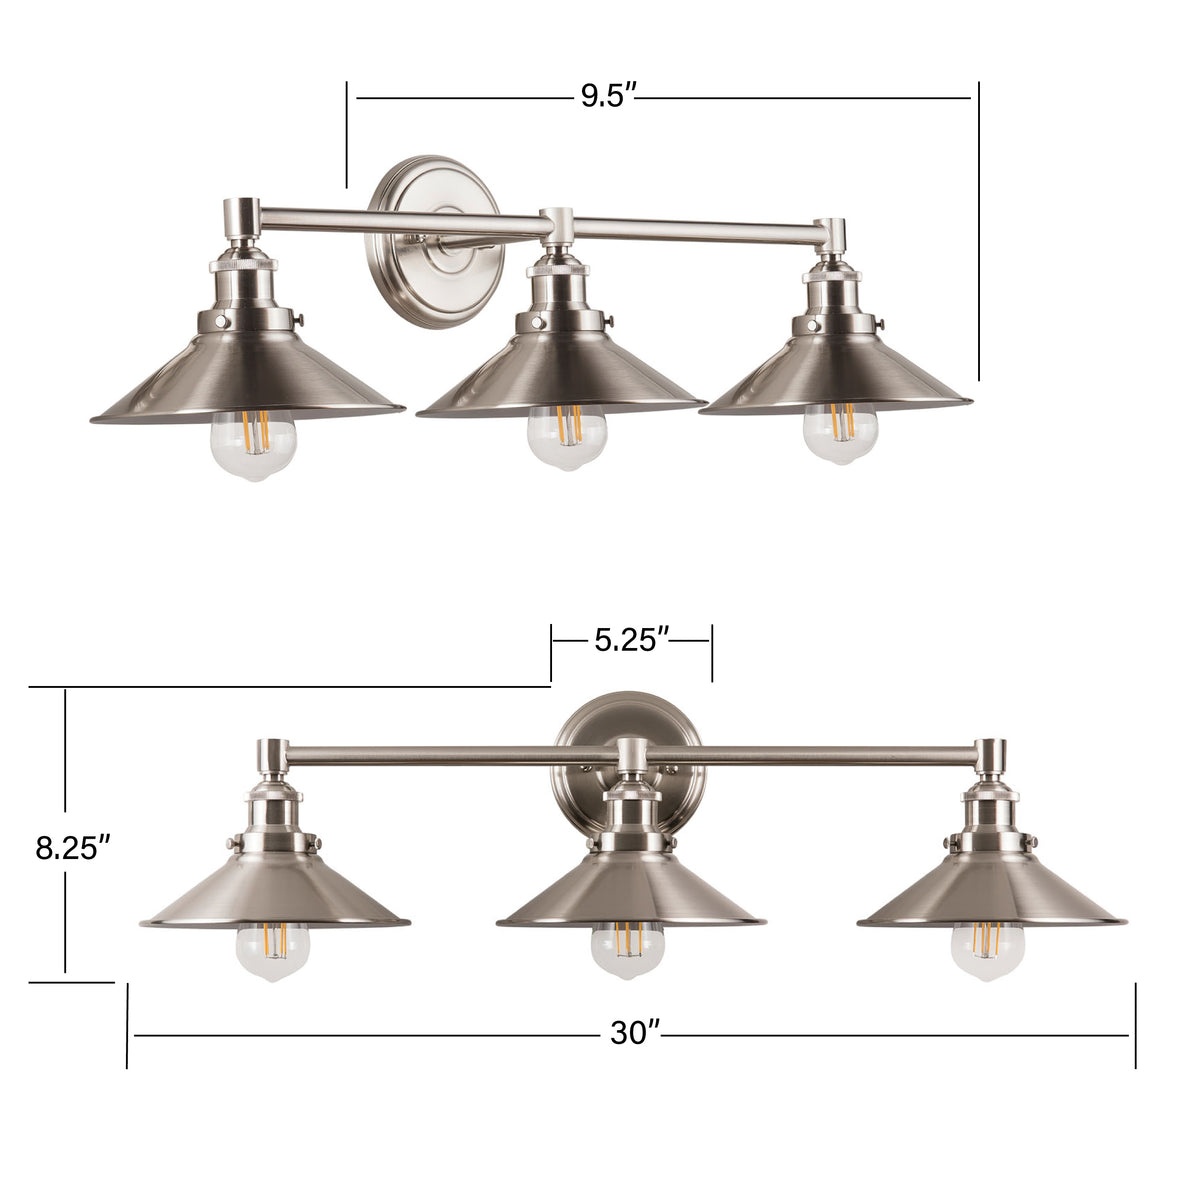 Andante LED Industrial Light Wall Sconce Brushed Nickel Linea di Liara LL-WL437-BN - 5